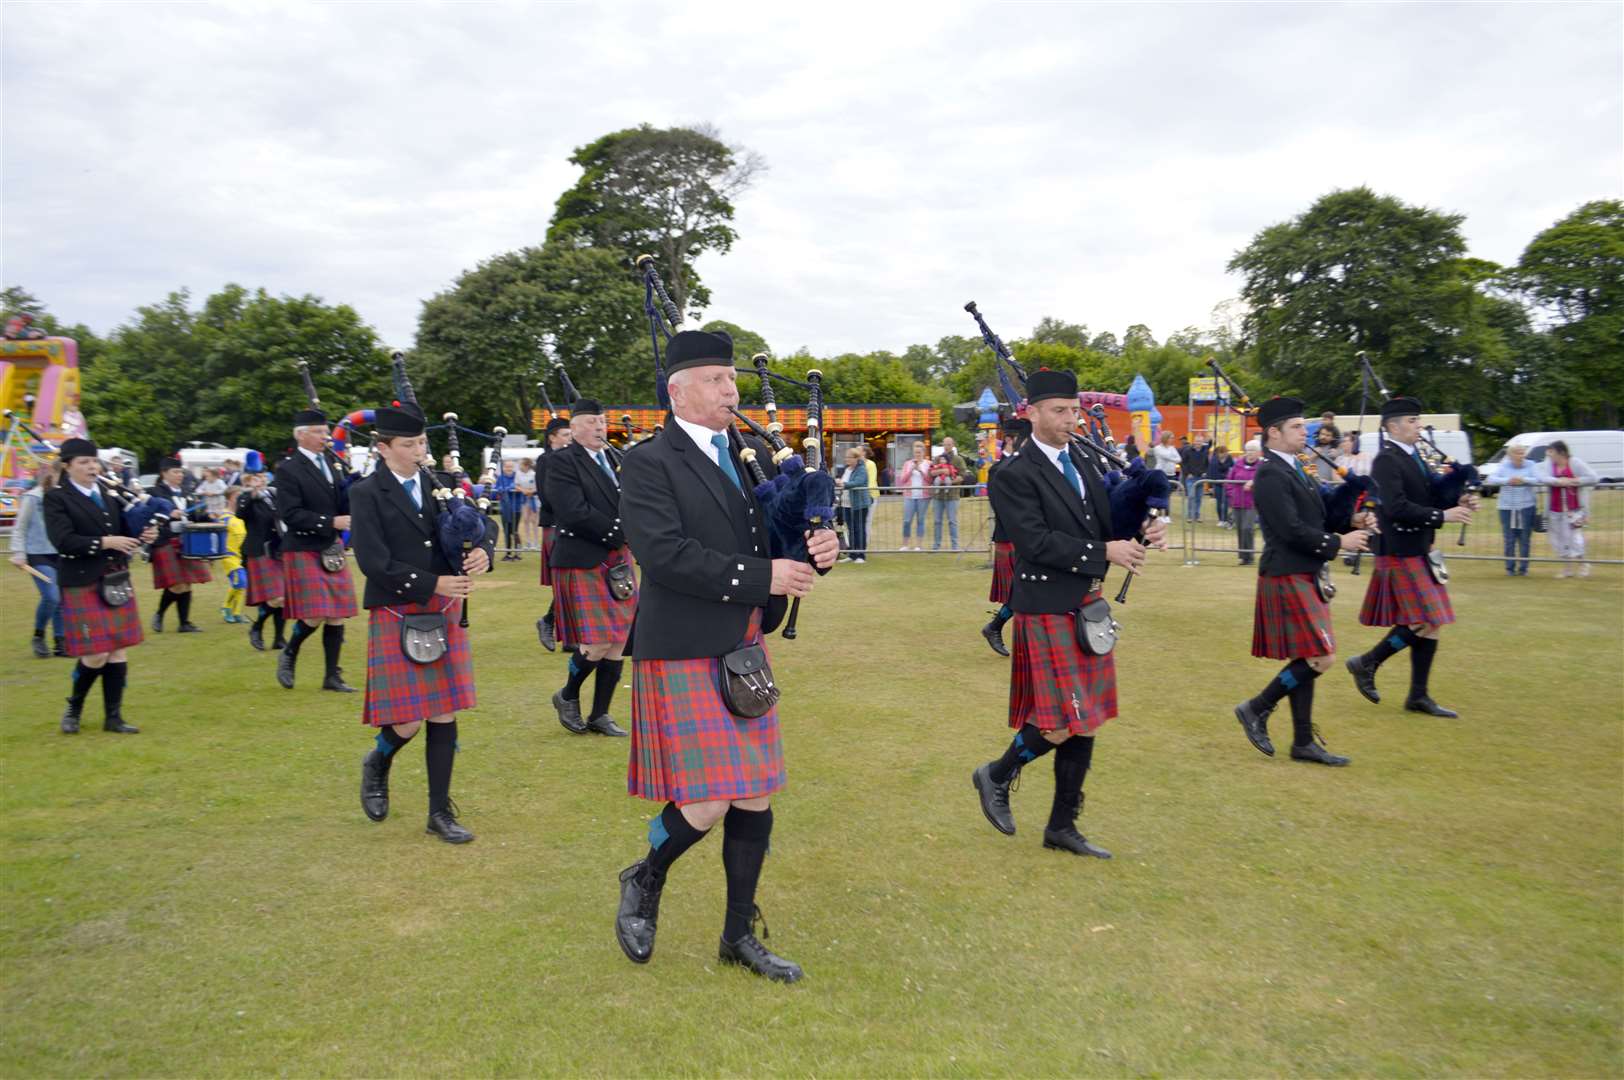 Tain Pipe Band will lead the parade down to the Links to kick off Gala Saturday.